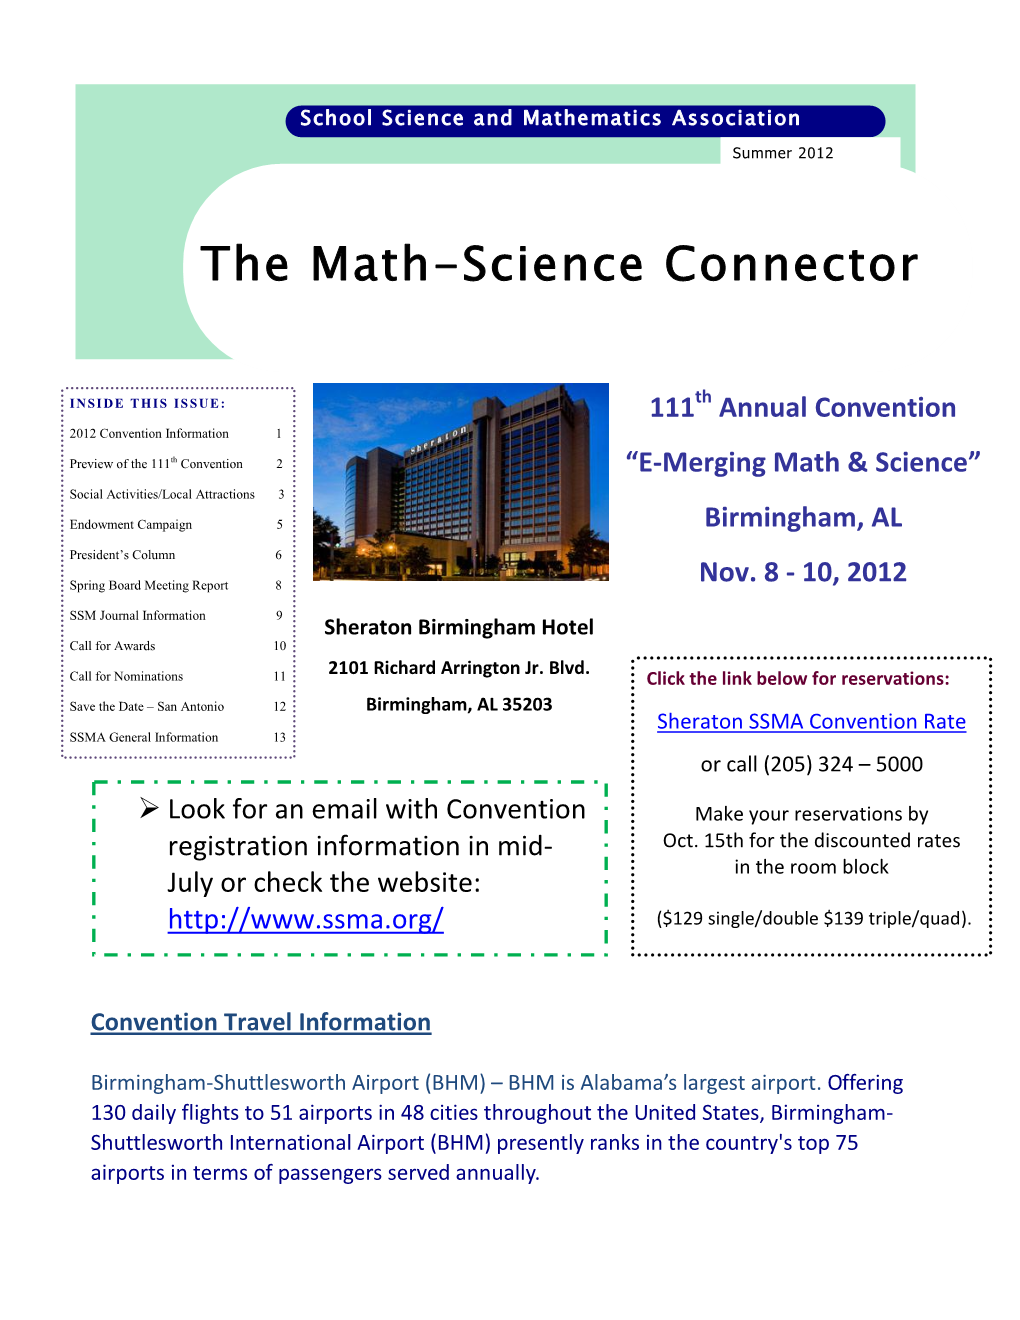 The Math Science Connector